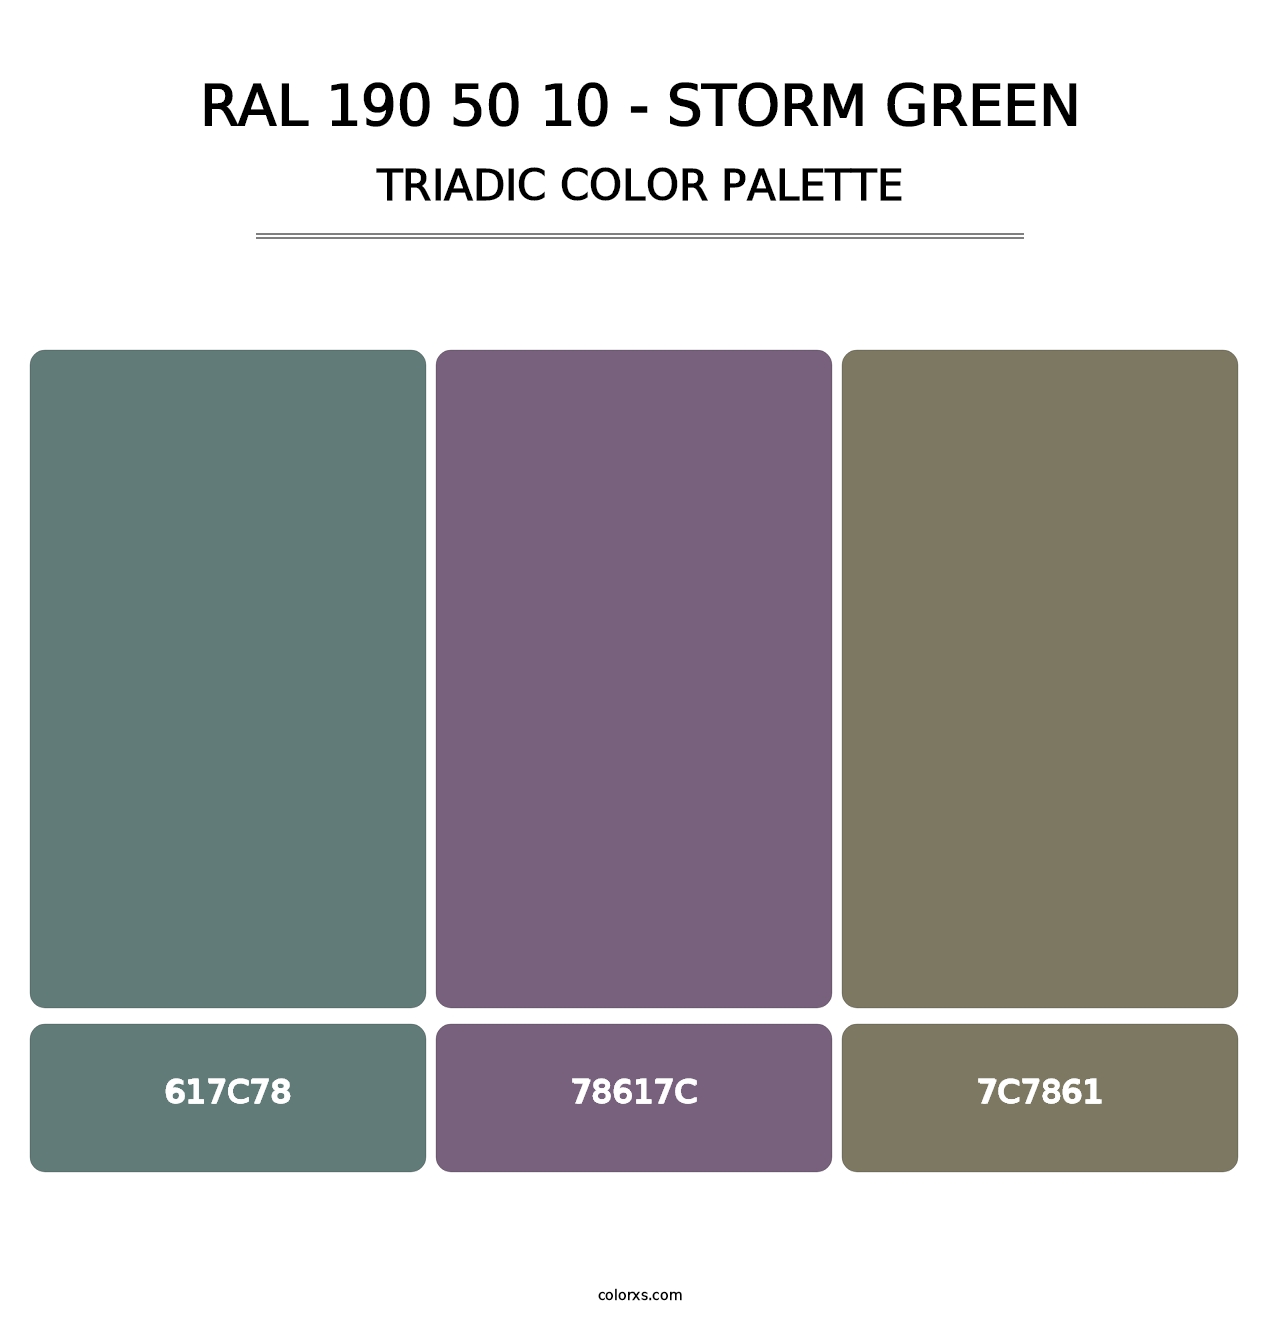 RAL 190 50 10 - Storm Green - Triadic Color Palette